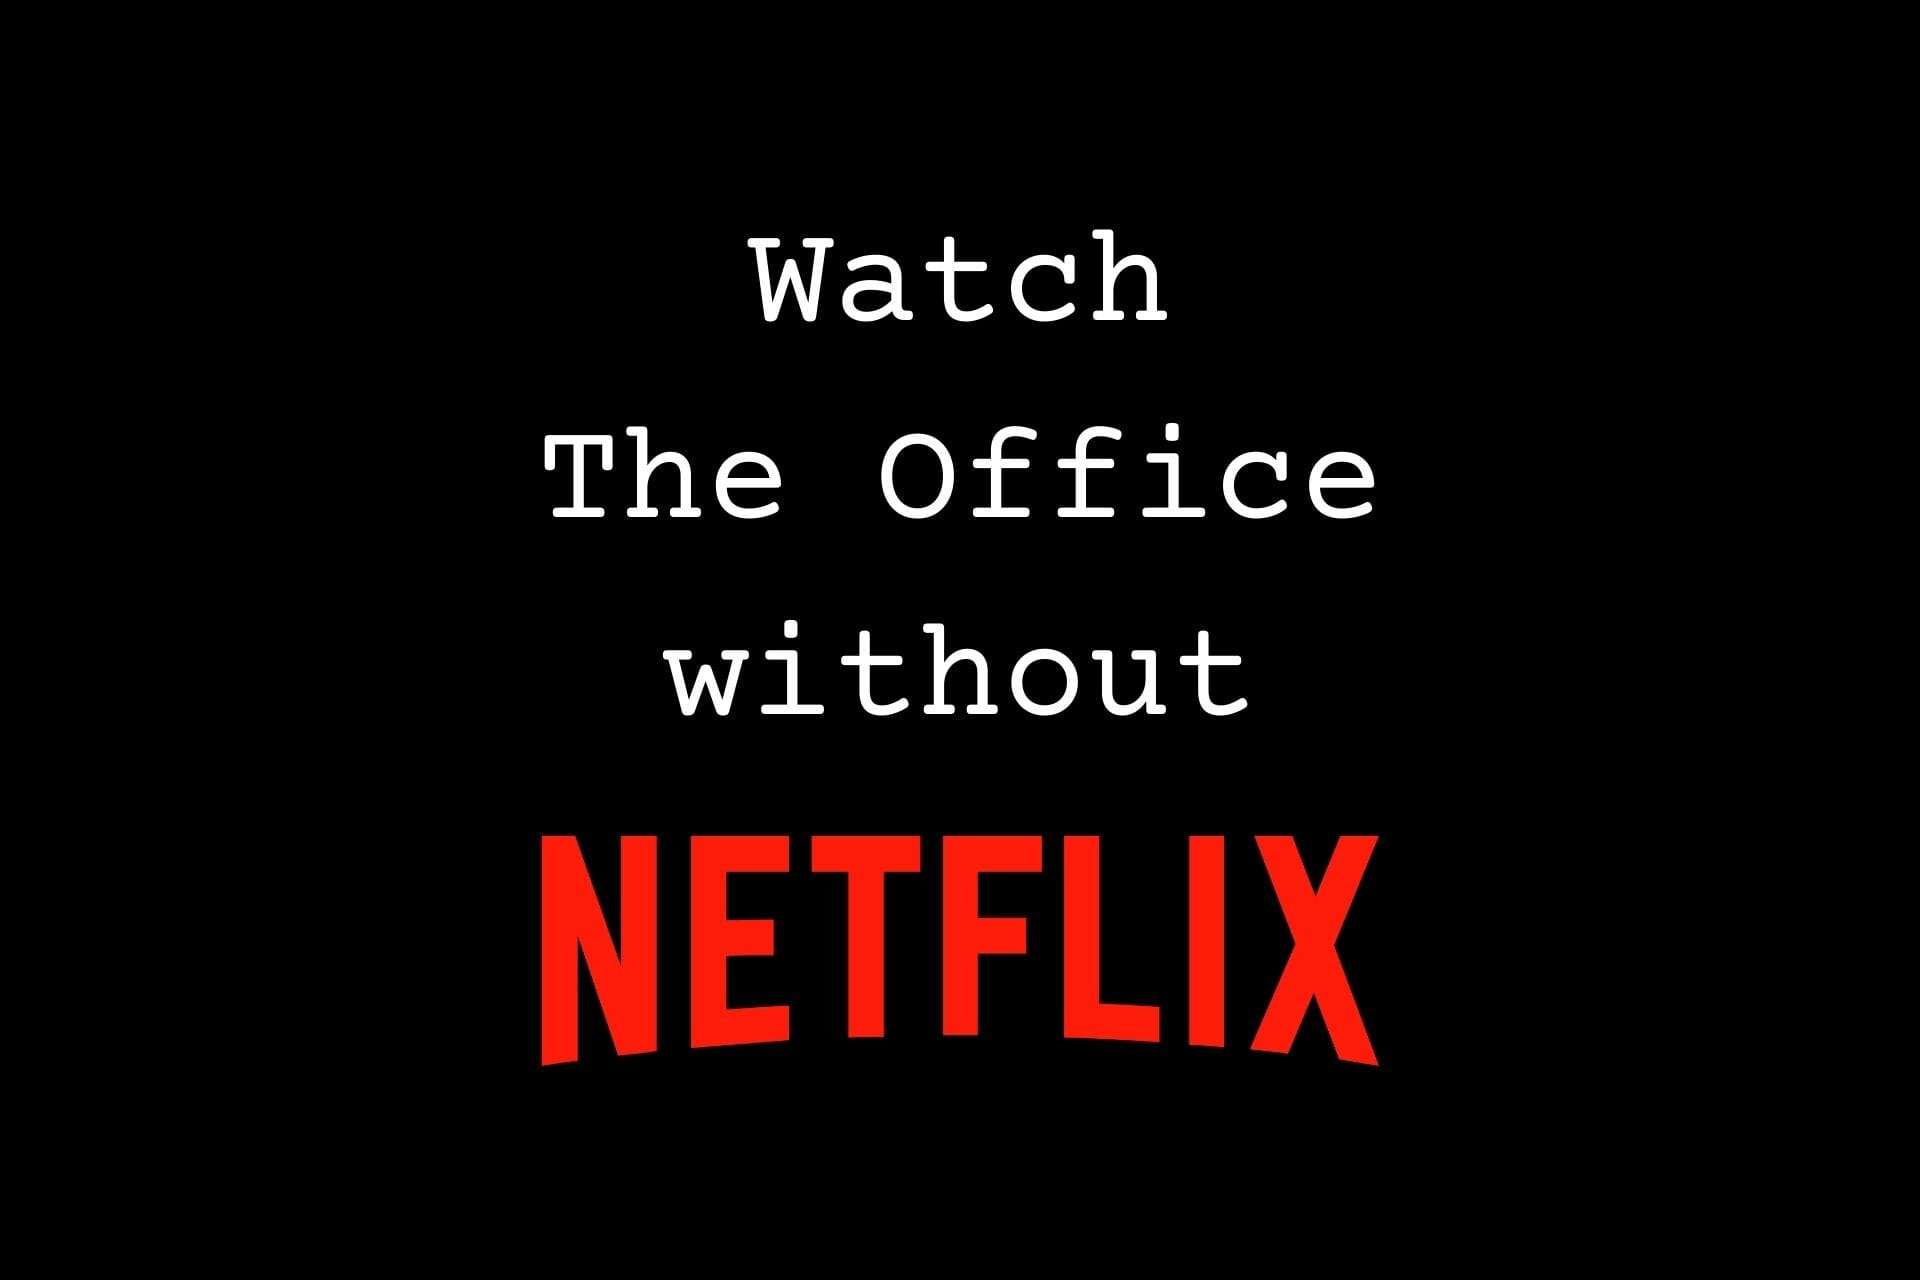 Watch The Office without Netflix